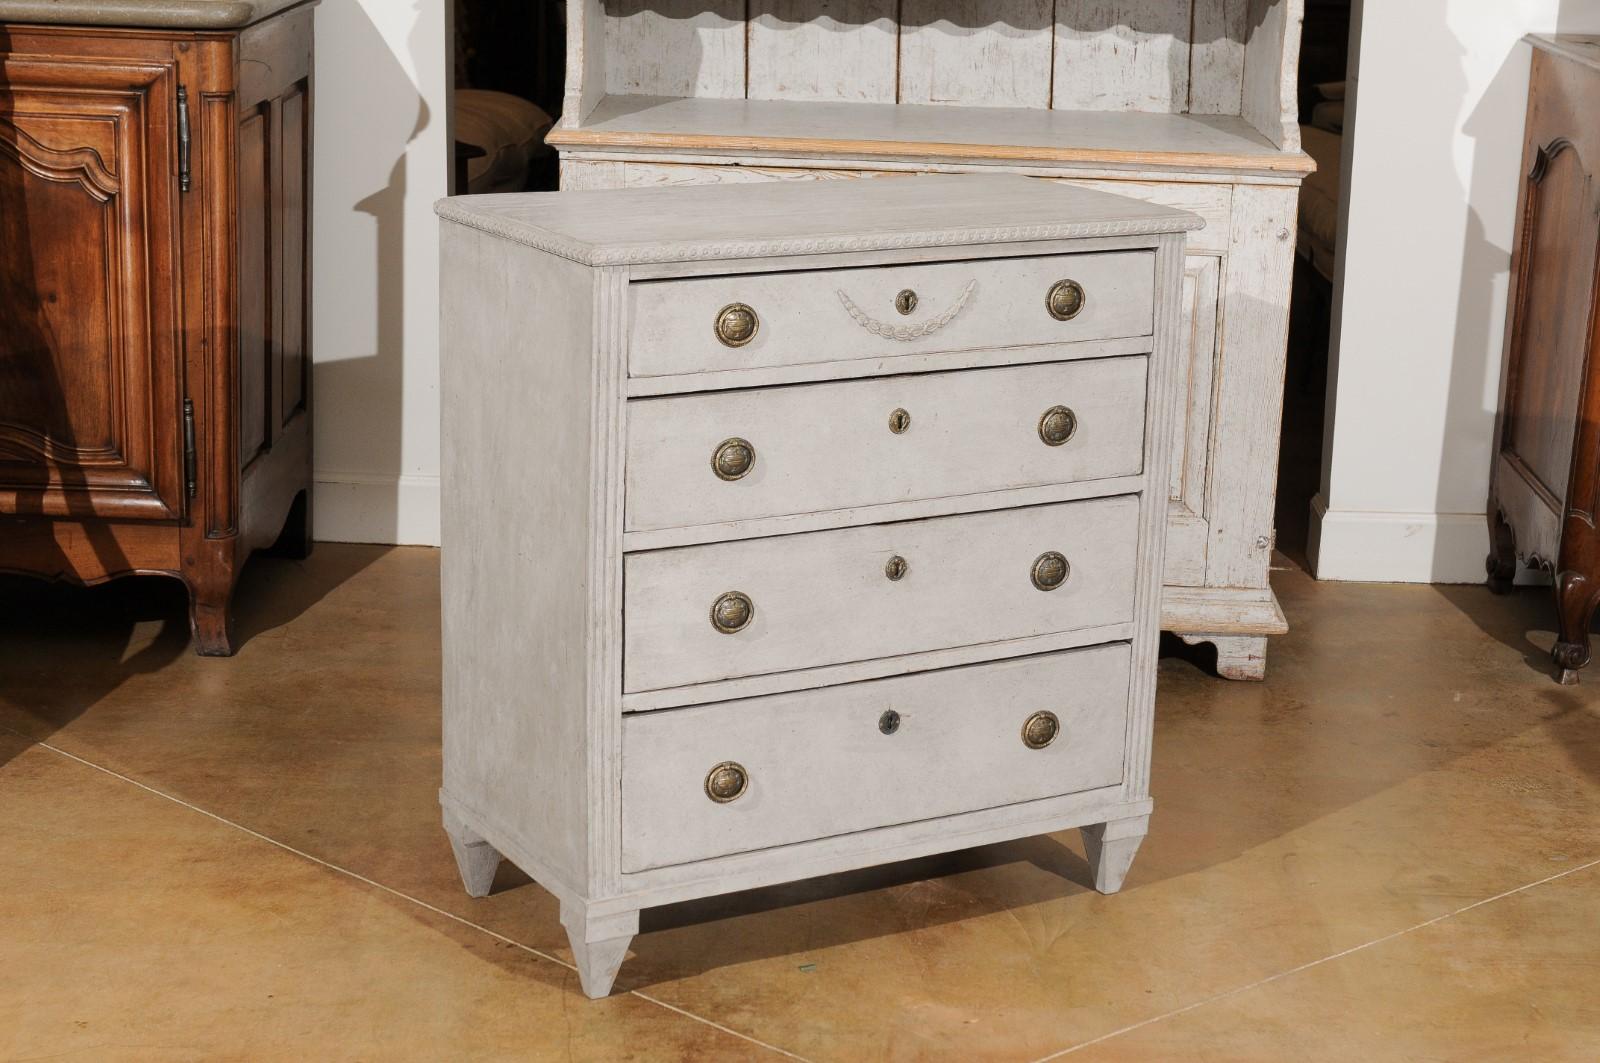 A Swedish Gustavian style painted wood chest-of-drawers from the 19th century, with carved guilloches and swag. Created in Sweden during the 19th century, this painted chest features a rectangular top carved with guilloche motifs on the rim, sitting